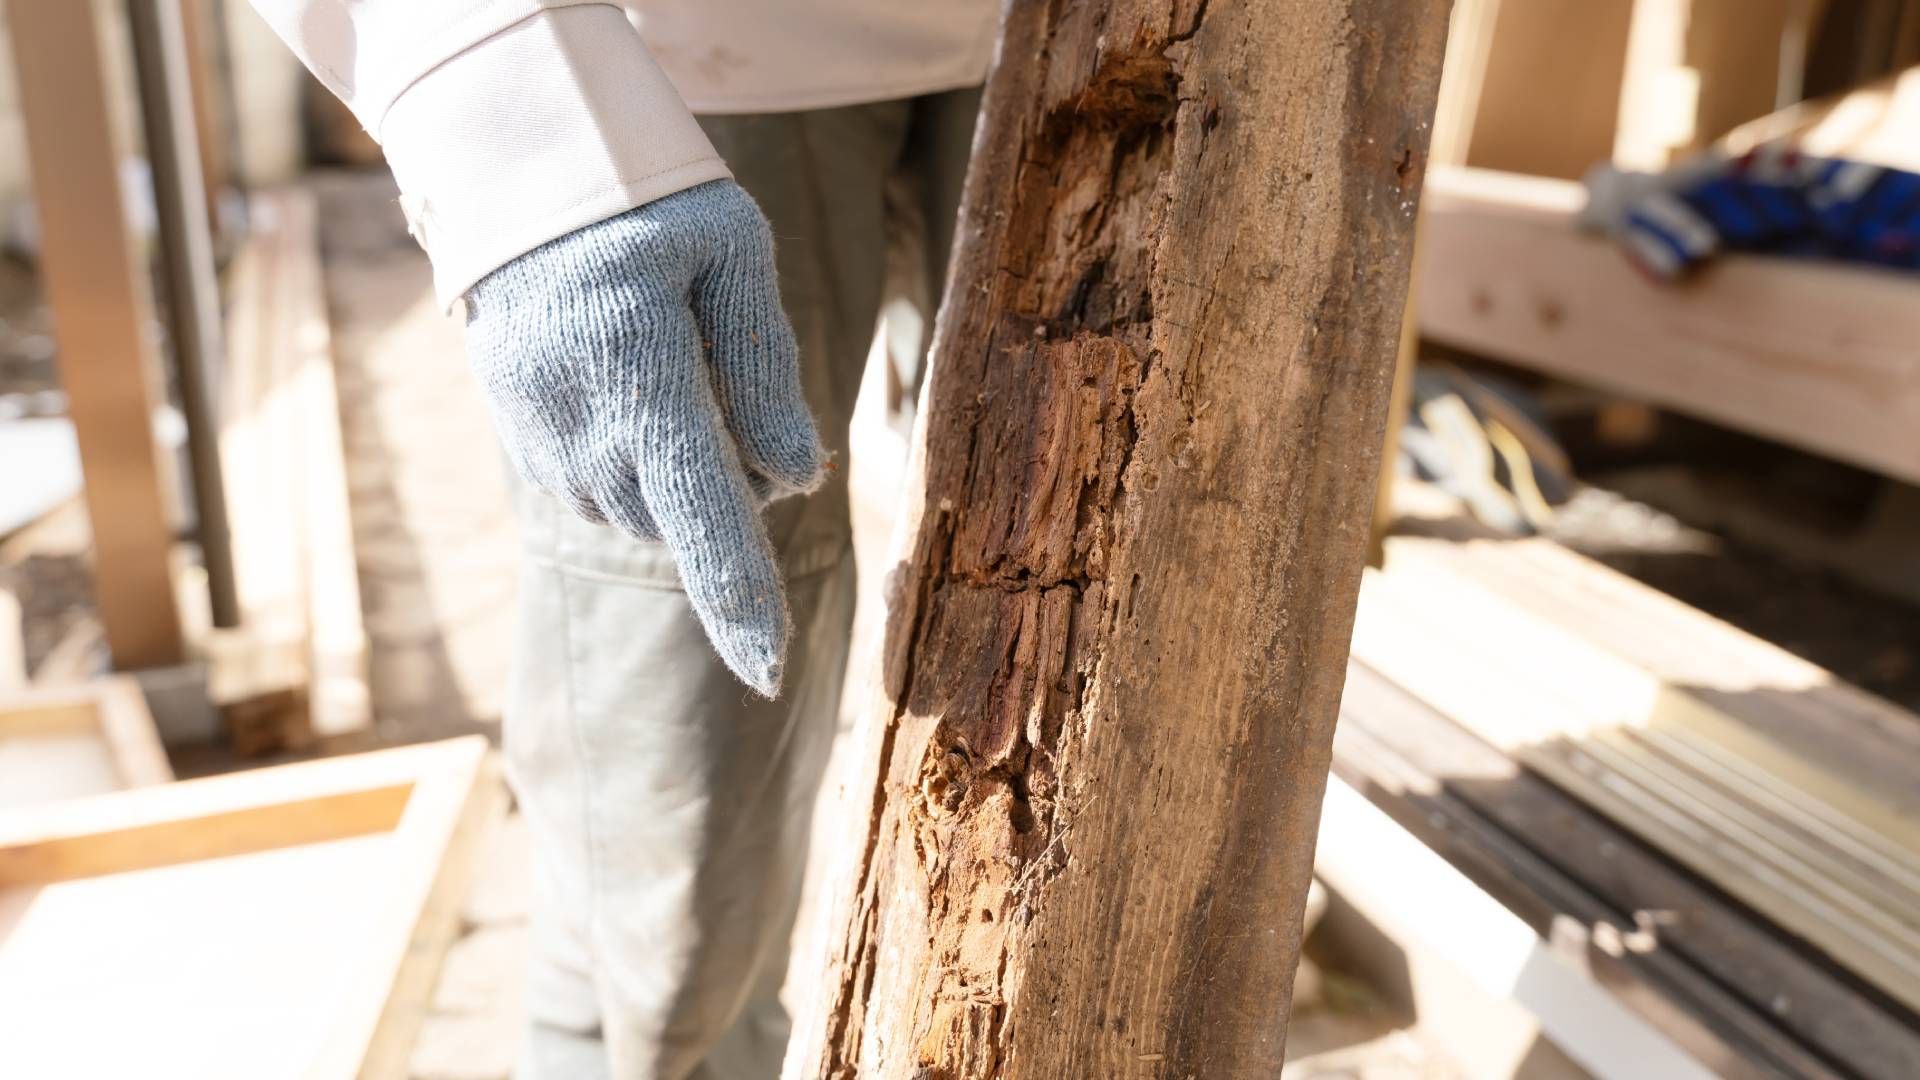 A termite inspector showing signs of termite damage in wood near Lexington, Kentucky (KY)